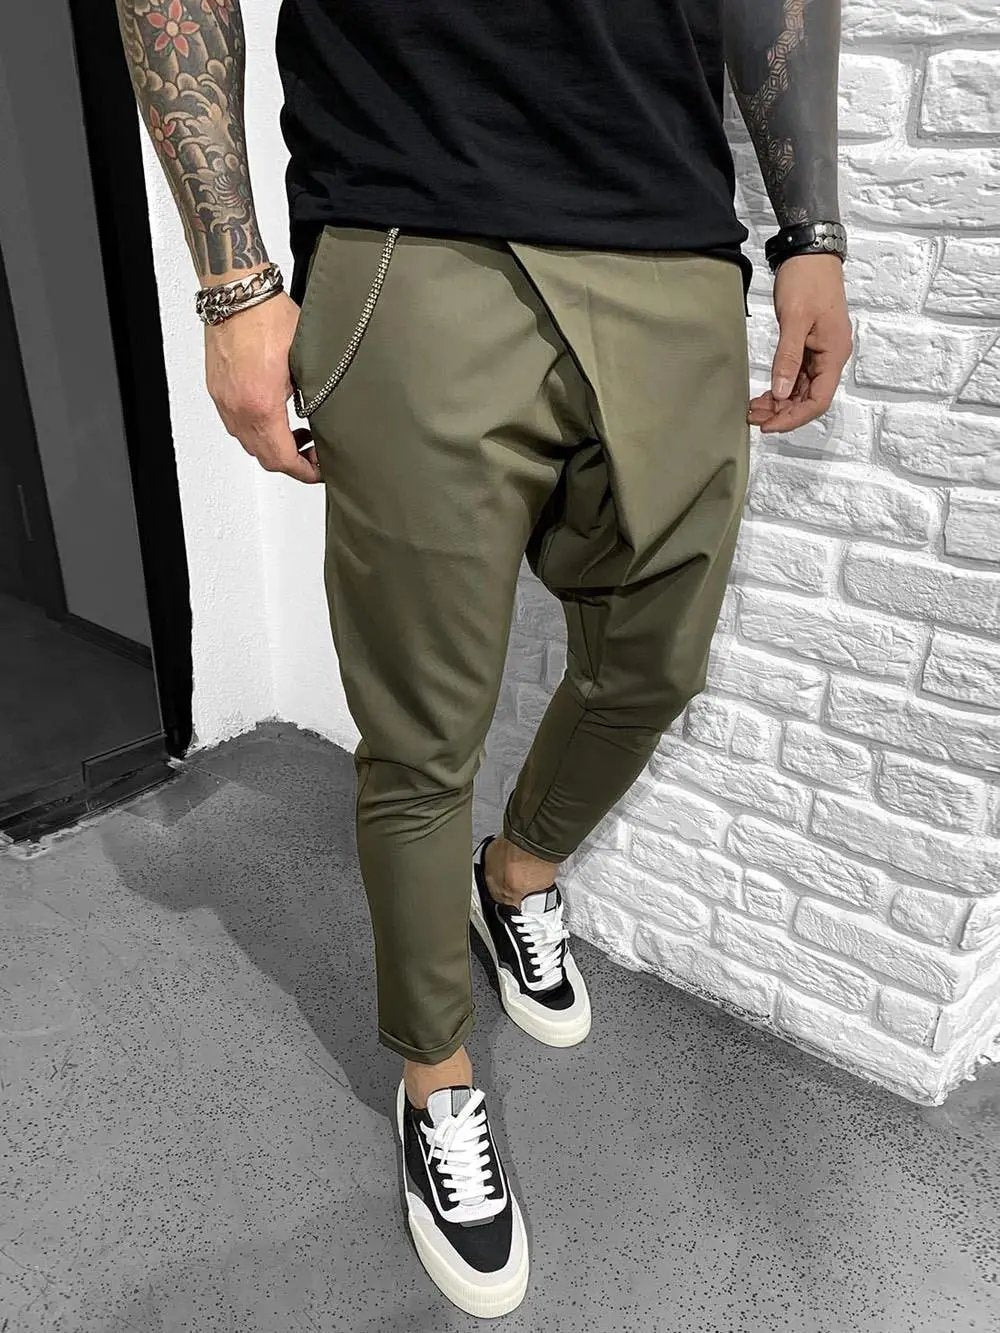 A man with tattoos wearing khaki pants made of elastic fabric for a comfortable and smooth feel.